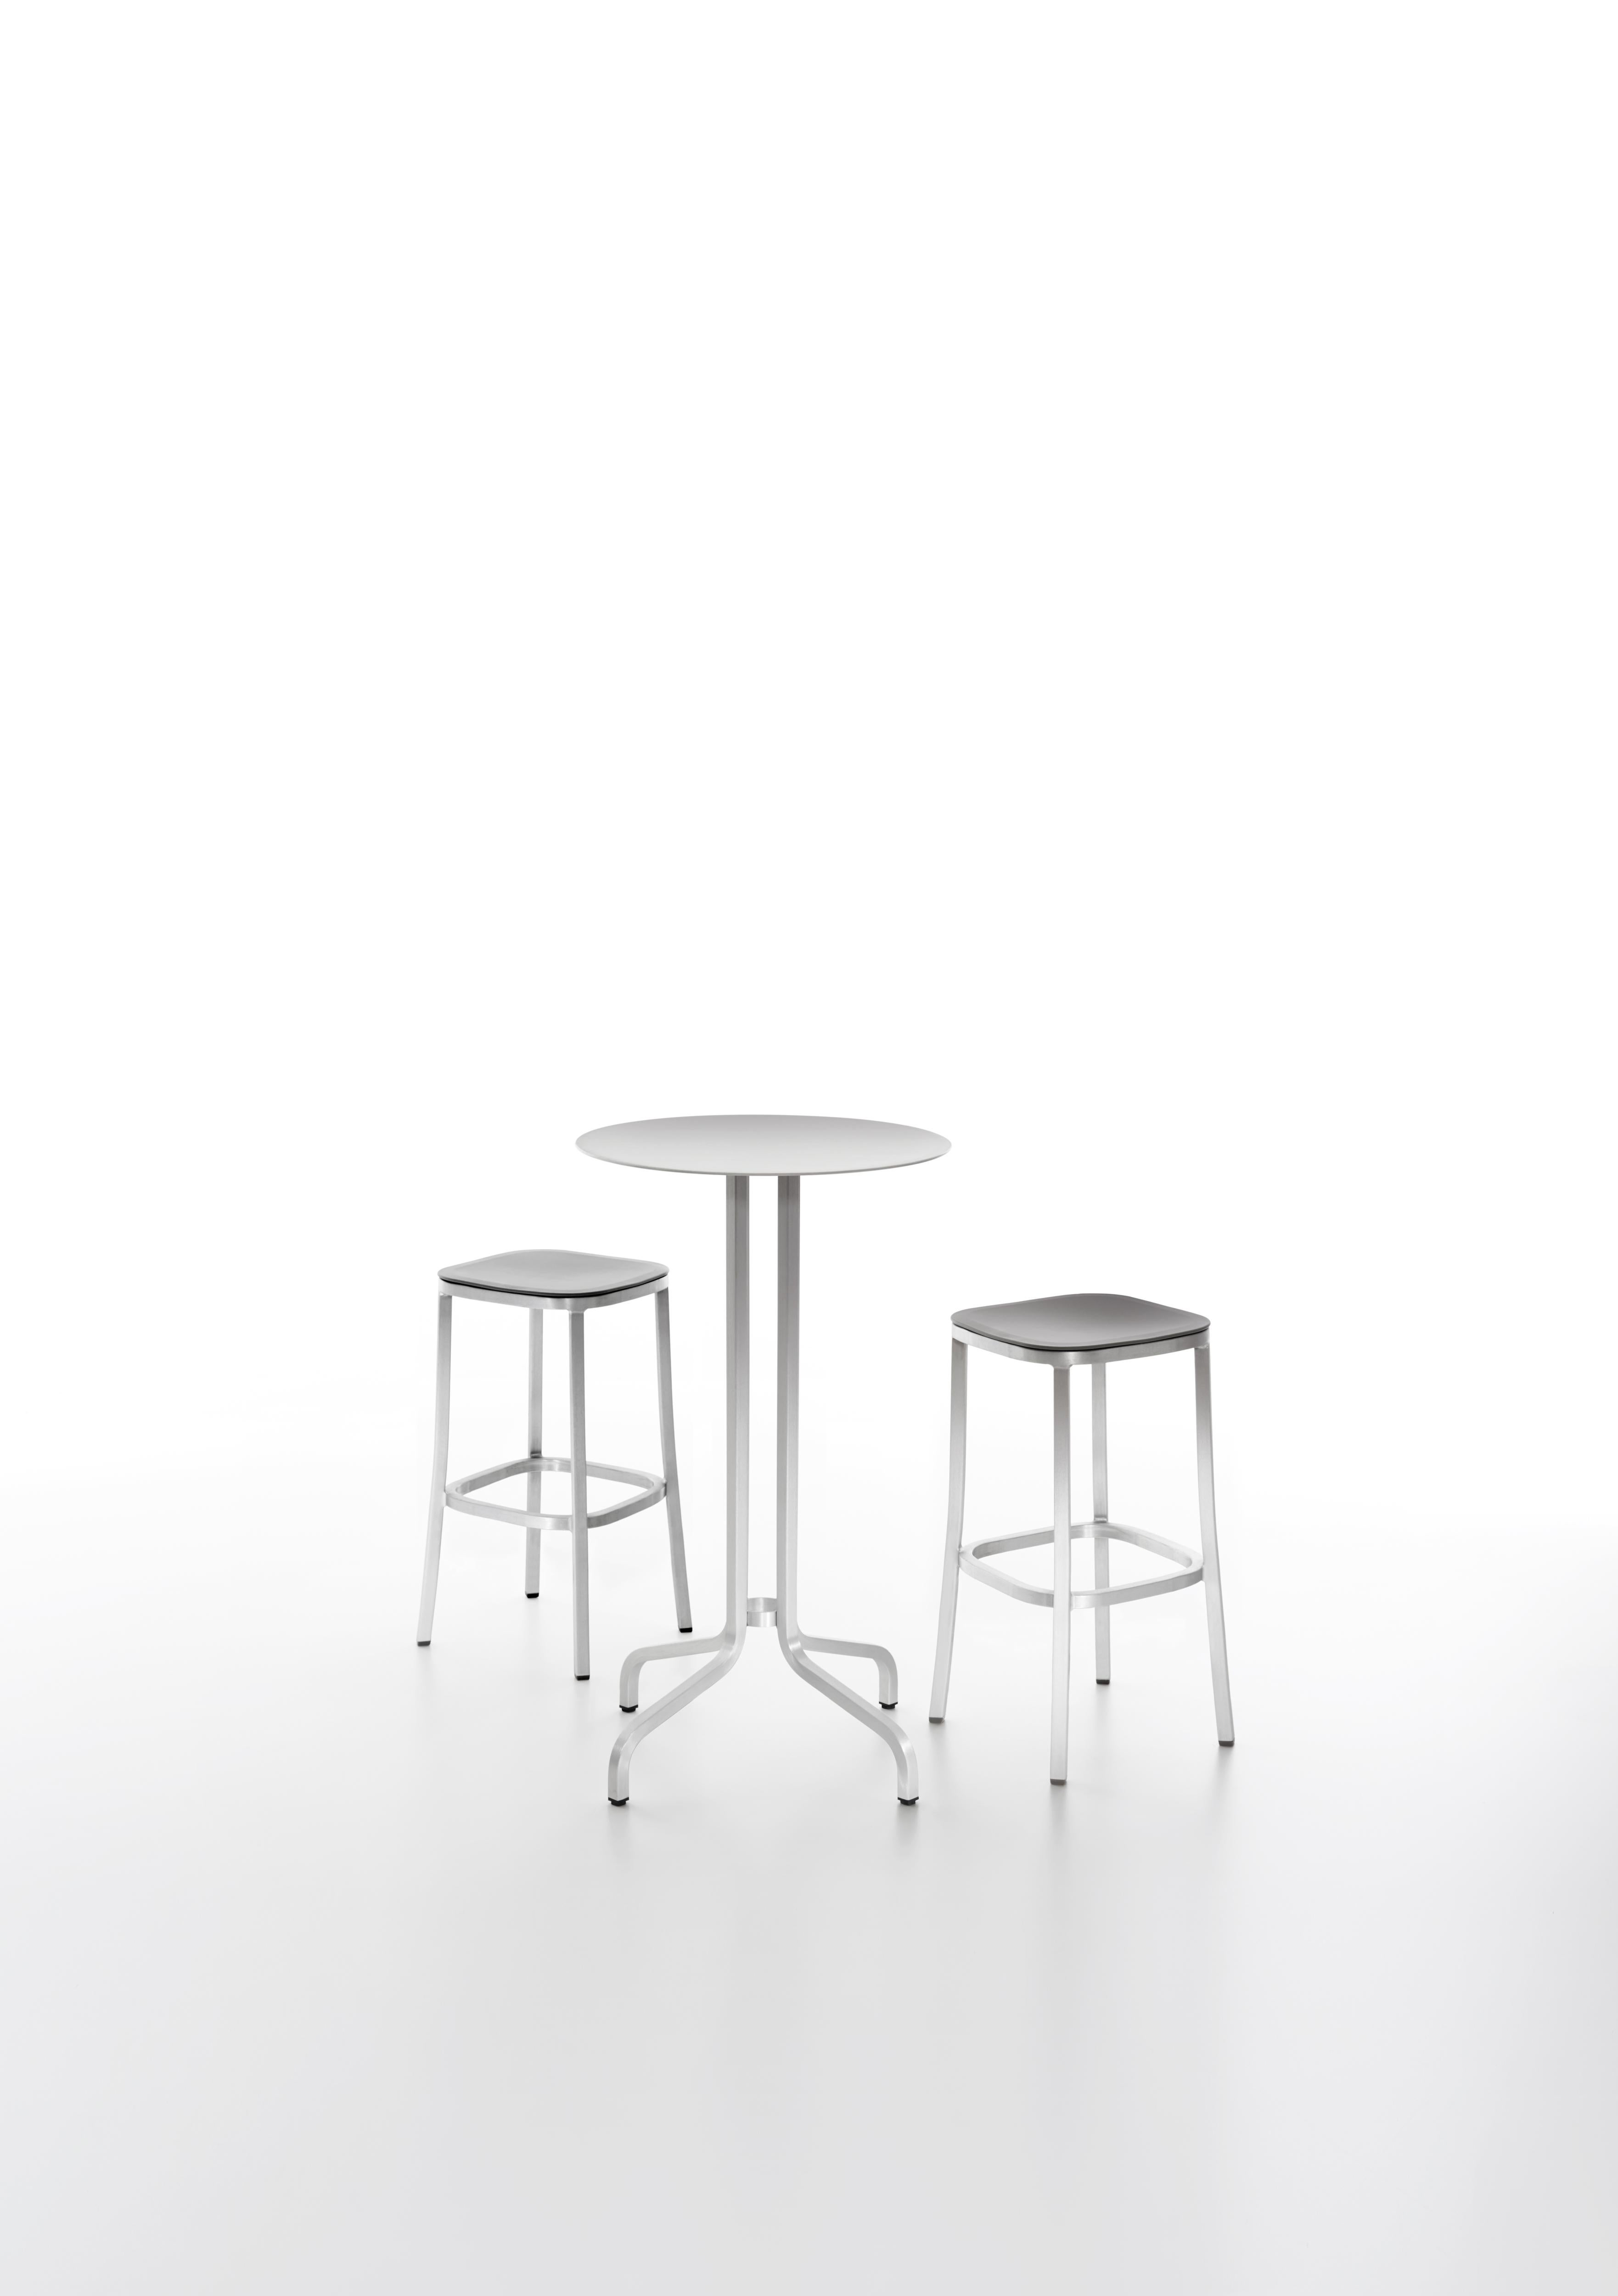 Emeco 1 Inch Barstool in Dark Powder-Coated Aluminum & Walnut by Jasper Morrison In New Condition For Sale In Hanover, PA